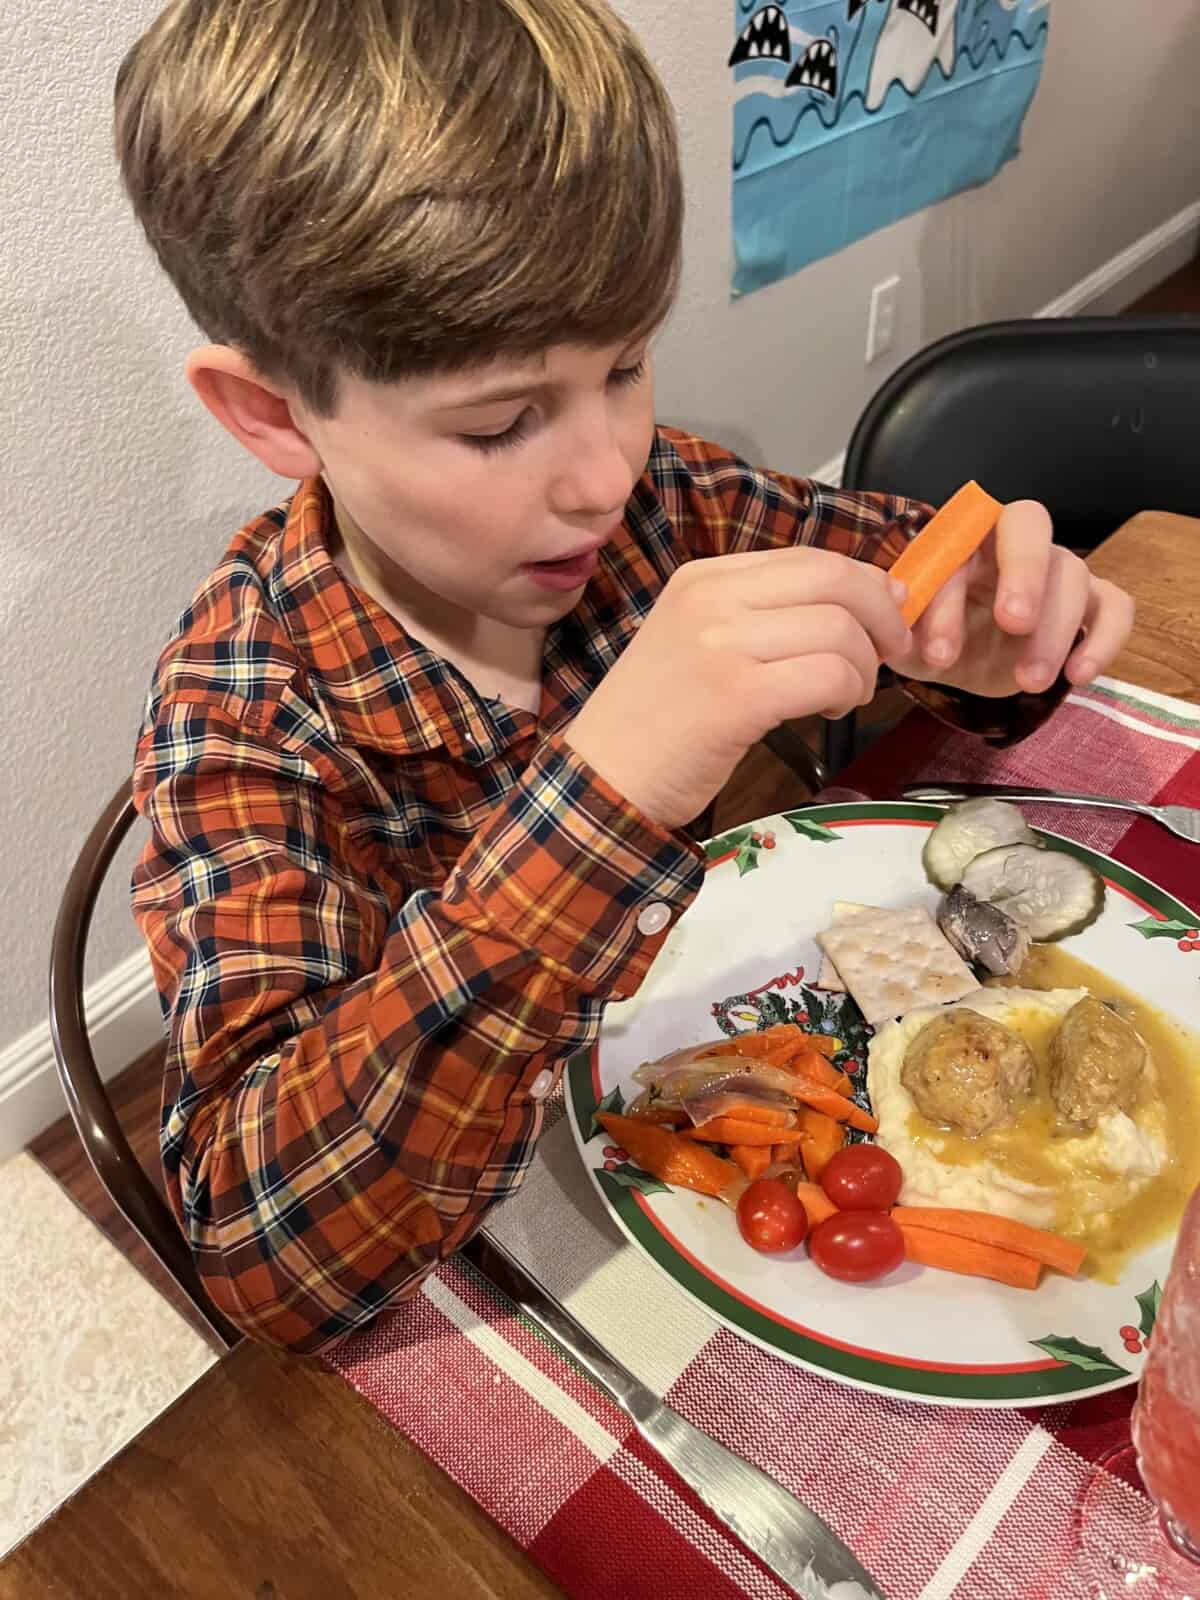 boy eating a plate of meatballs and carrots.